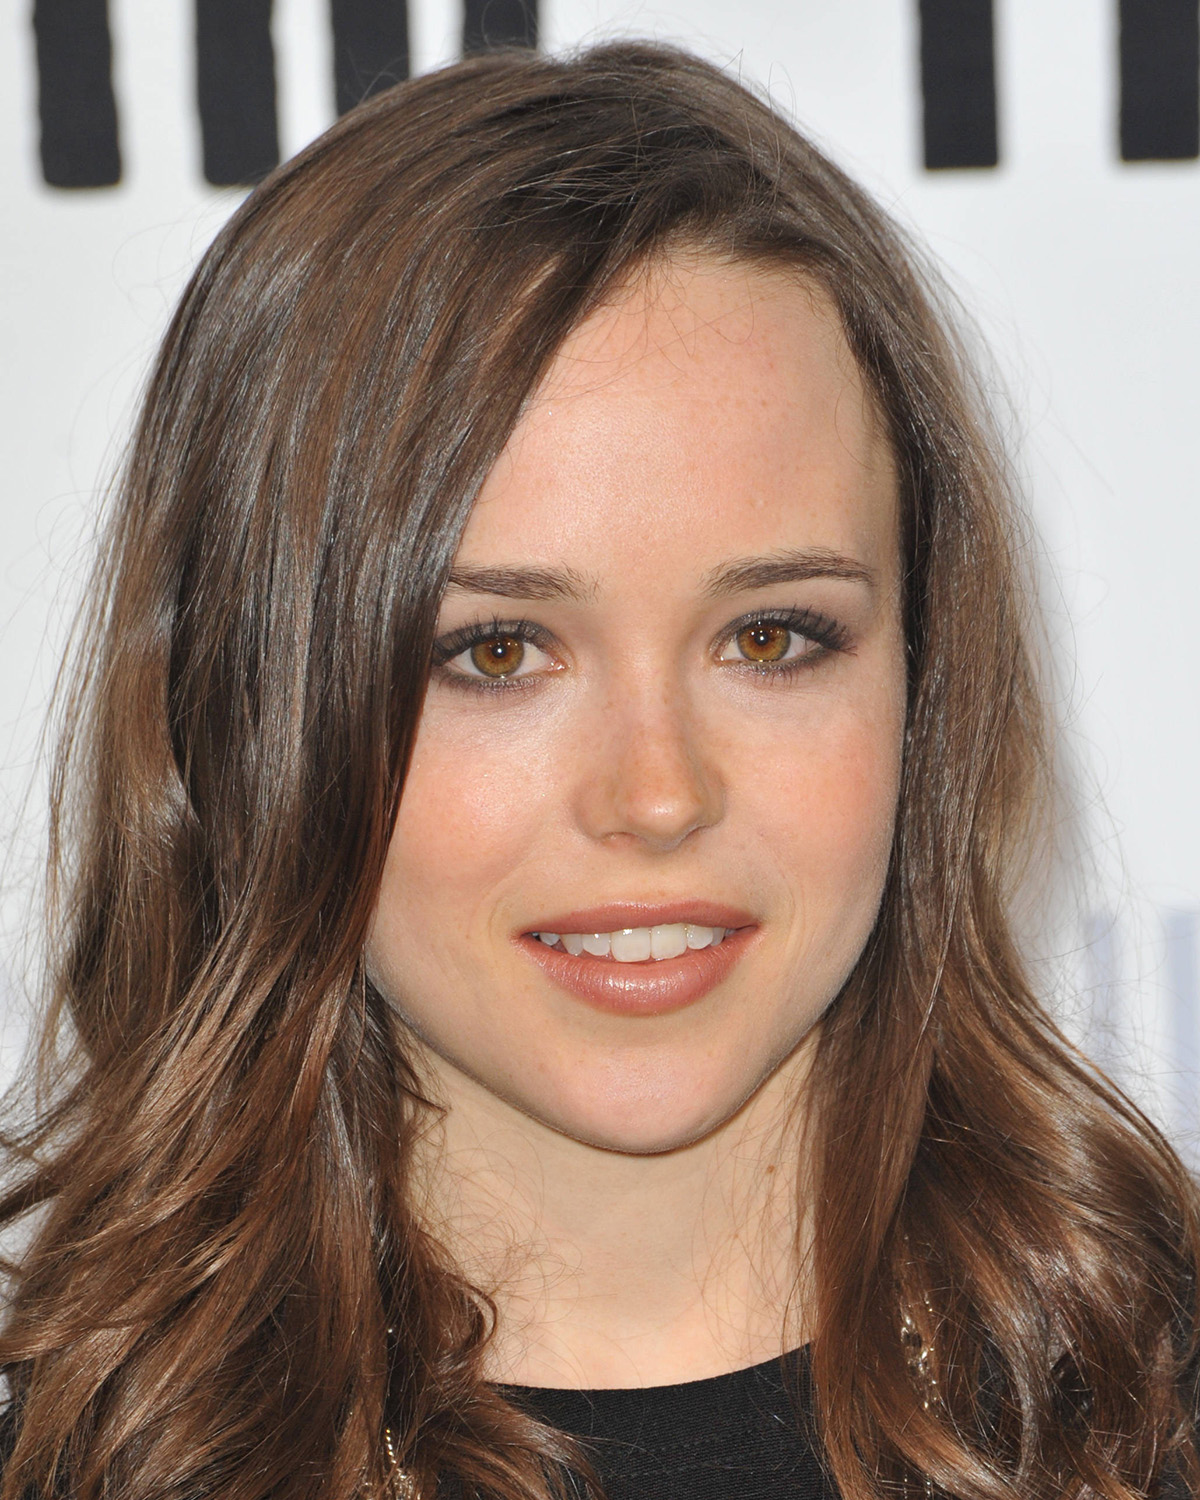 Ellen Page photo 73 of 253 pics, wallpaper - photo #253179 - ThePlace2